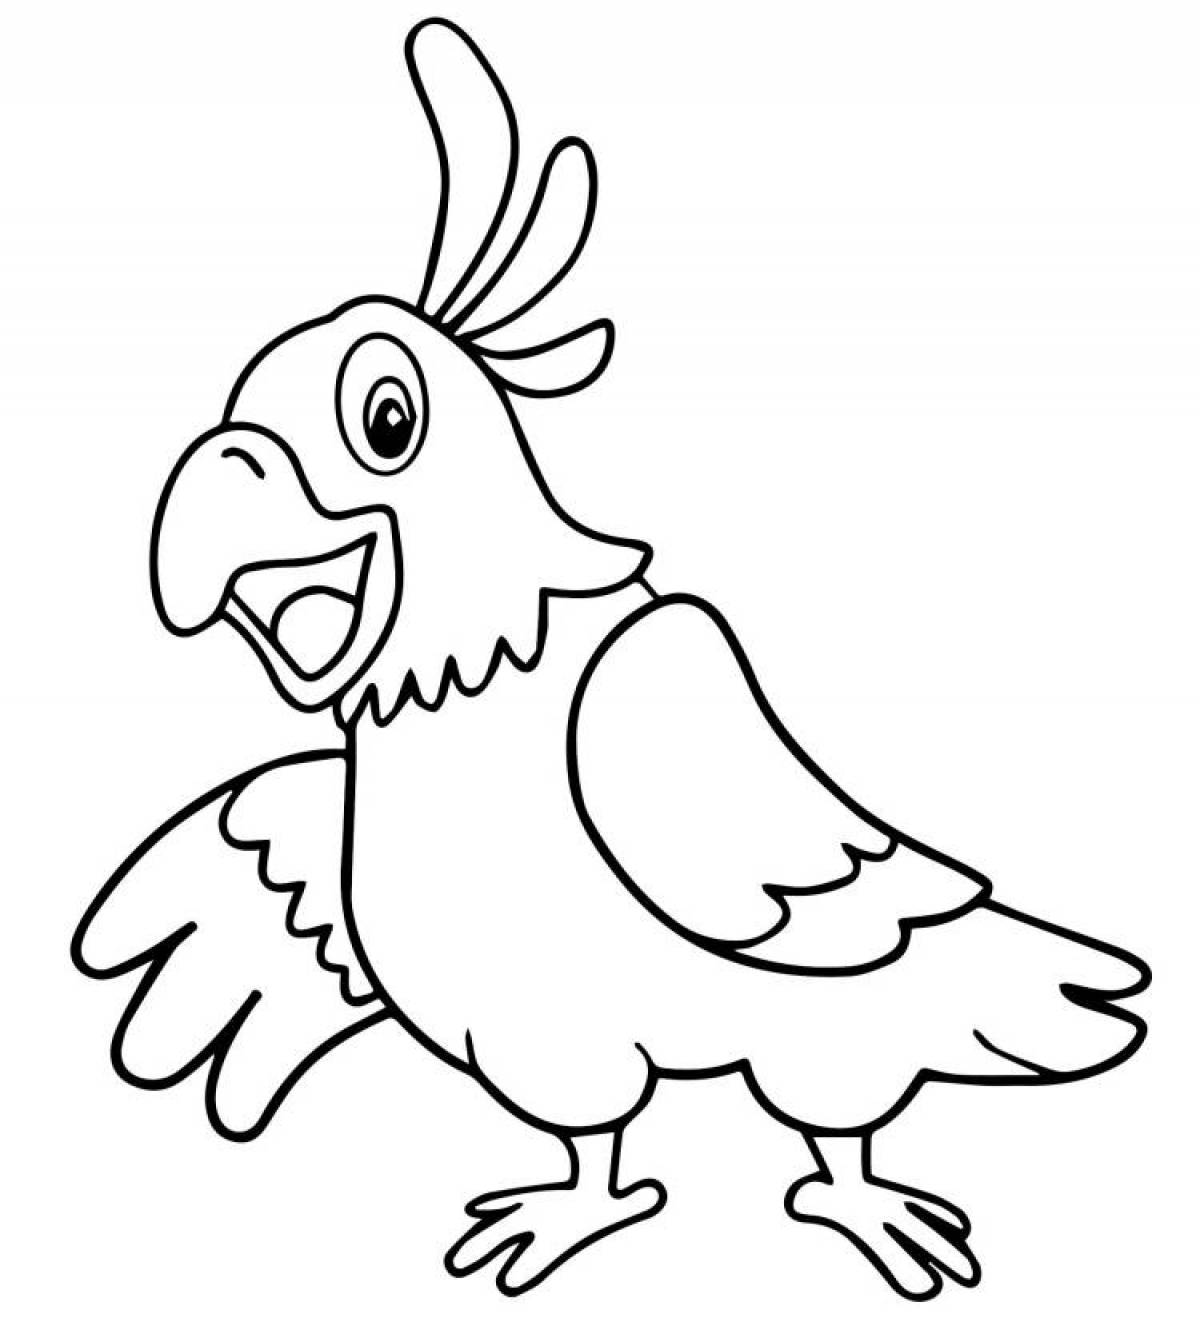 Fun coloring parrot for kids